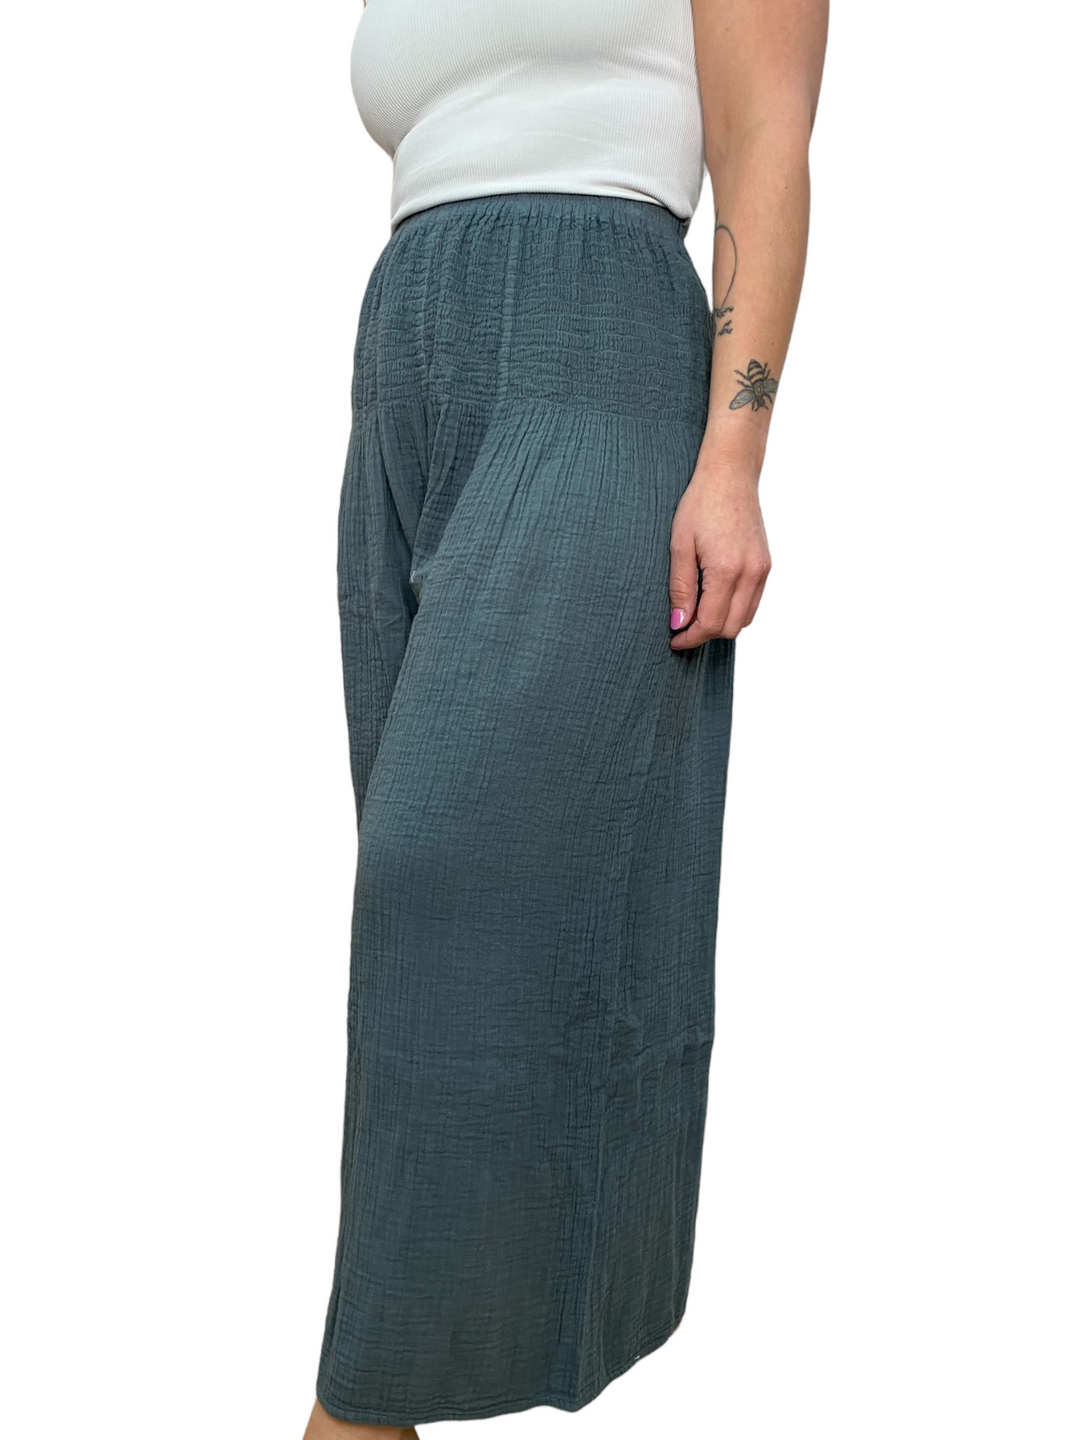 SLATE GREY COTTON TROUSERS - Kingfisher Road - Online Boutique